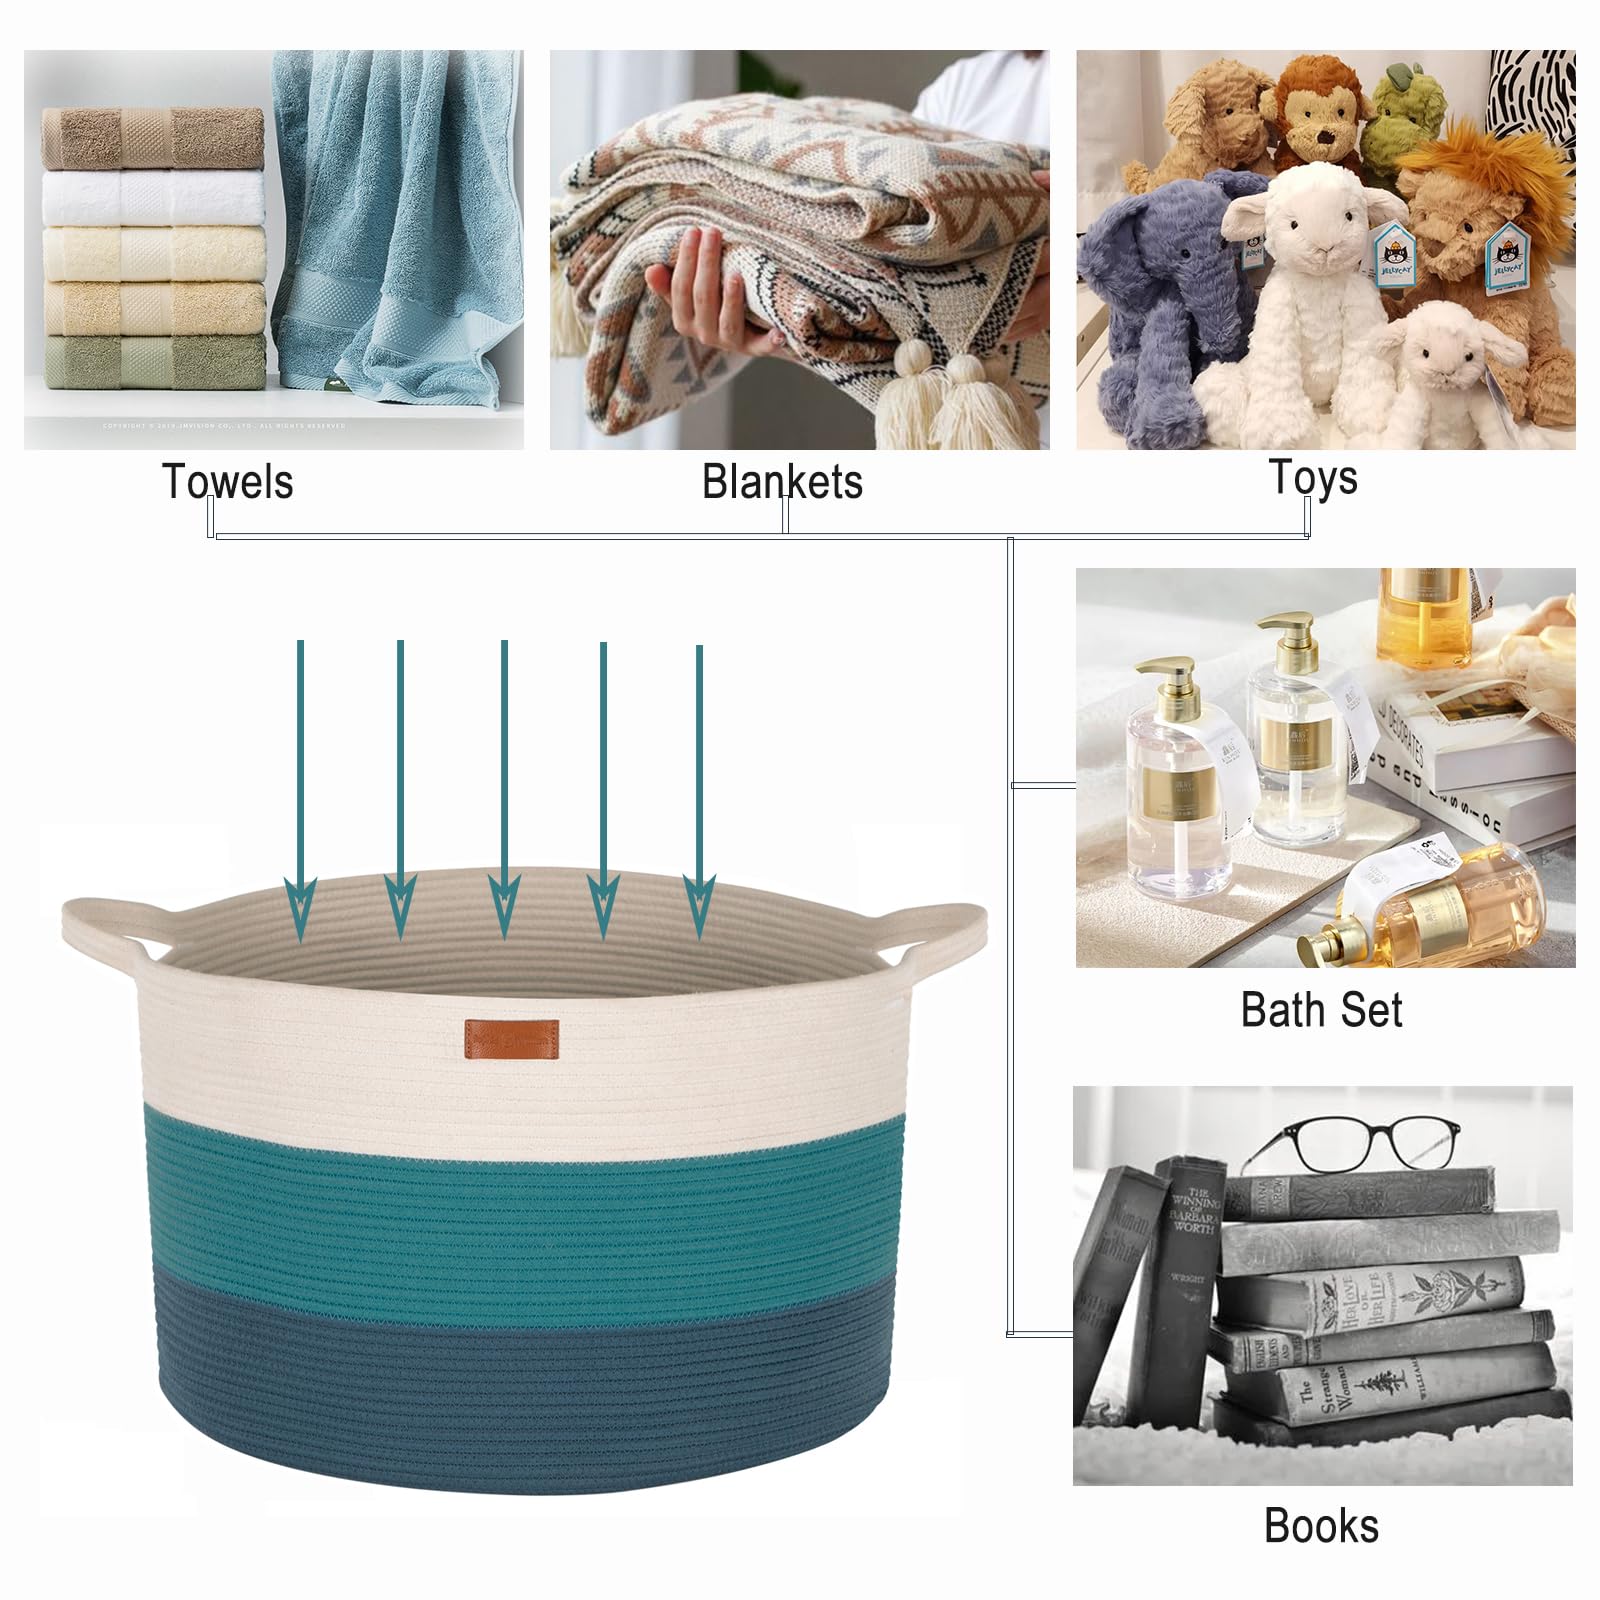 Sophia & William XXXLarge Cotton Rope Basket 21.7" x 21.7" x 13.8", Woven Nurery Storage Basket with Handle, Baby Laundry Basket Hamper for Toys Towels Comforters Blankets Pillows, 1 pack, Teal